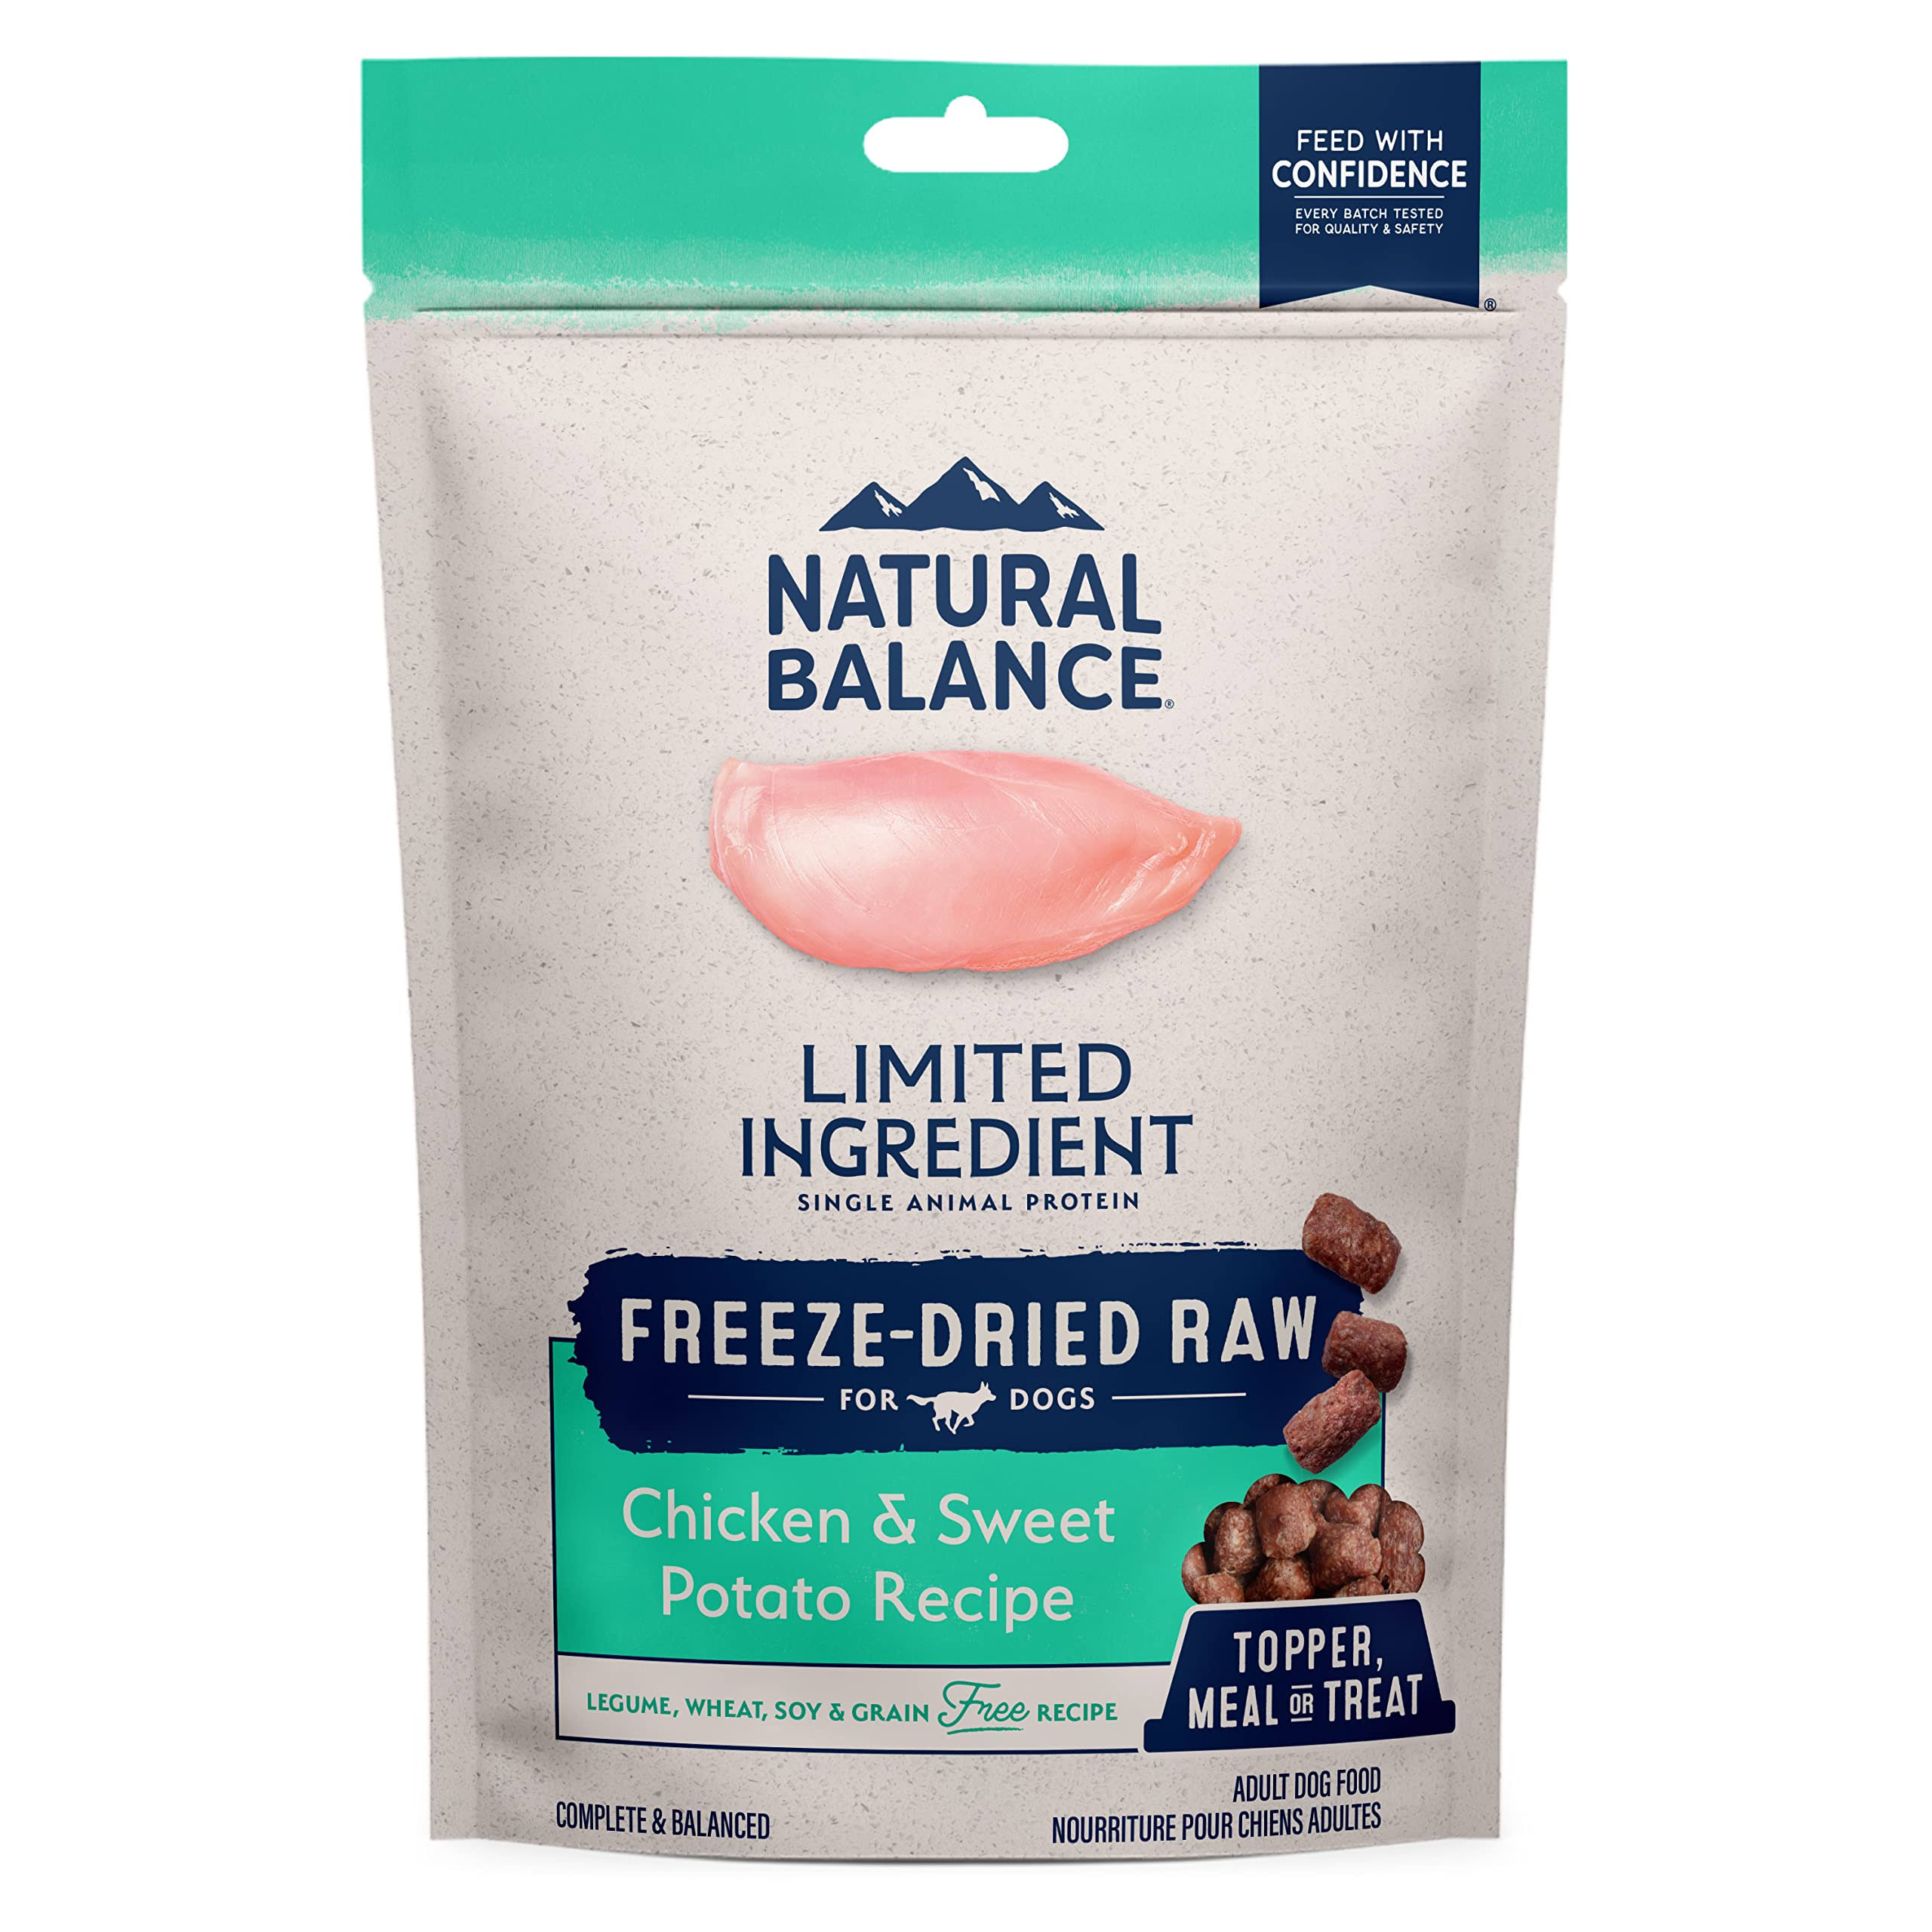 Natural Balance Limited Ingredient Freeze-Dried Chicken & Sweet Potato Recipe Dog Food Topper 6 oz